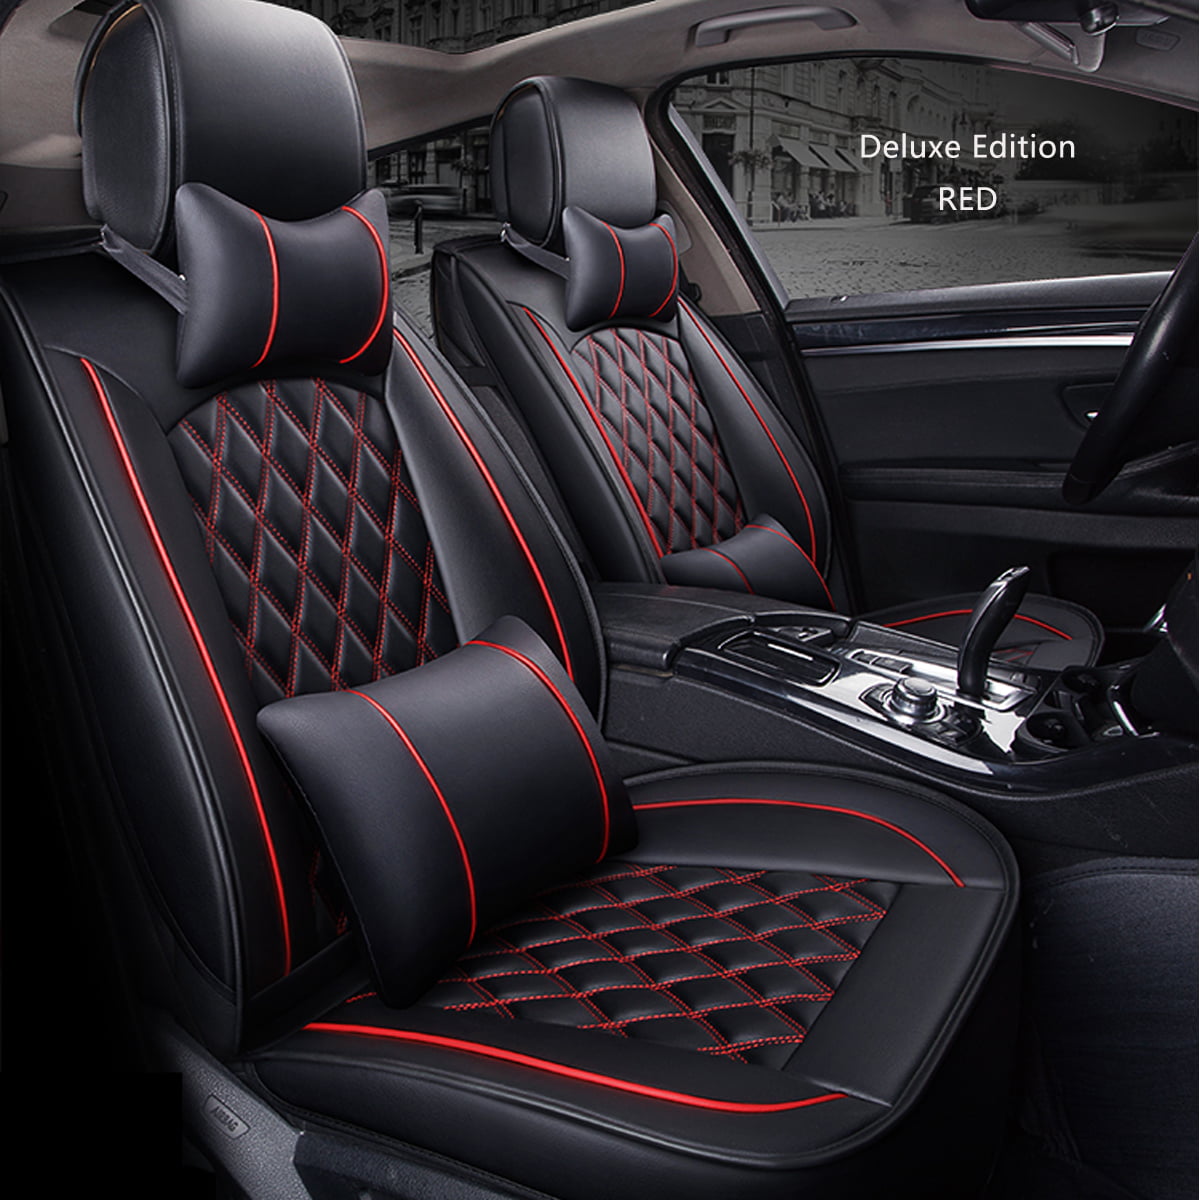 Black & Red Car Seat Covers Luxury PU Leather Interior Full Coverage Universal